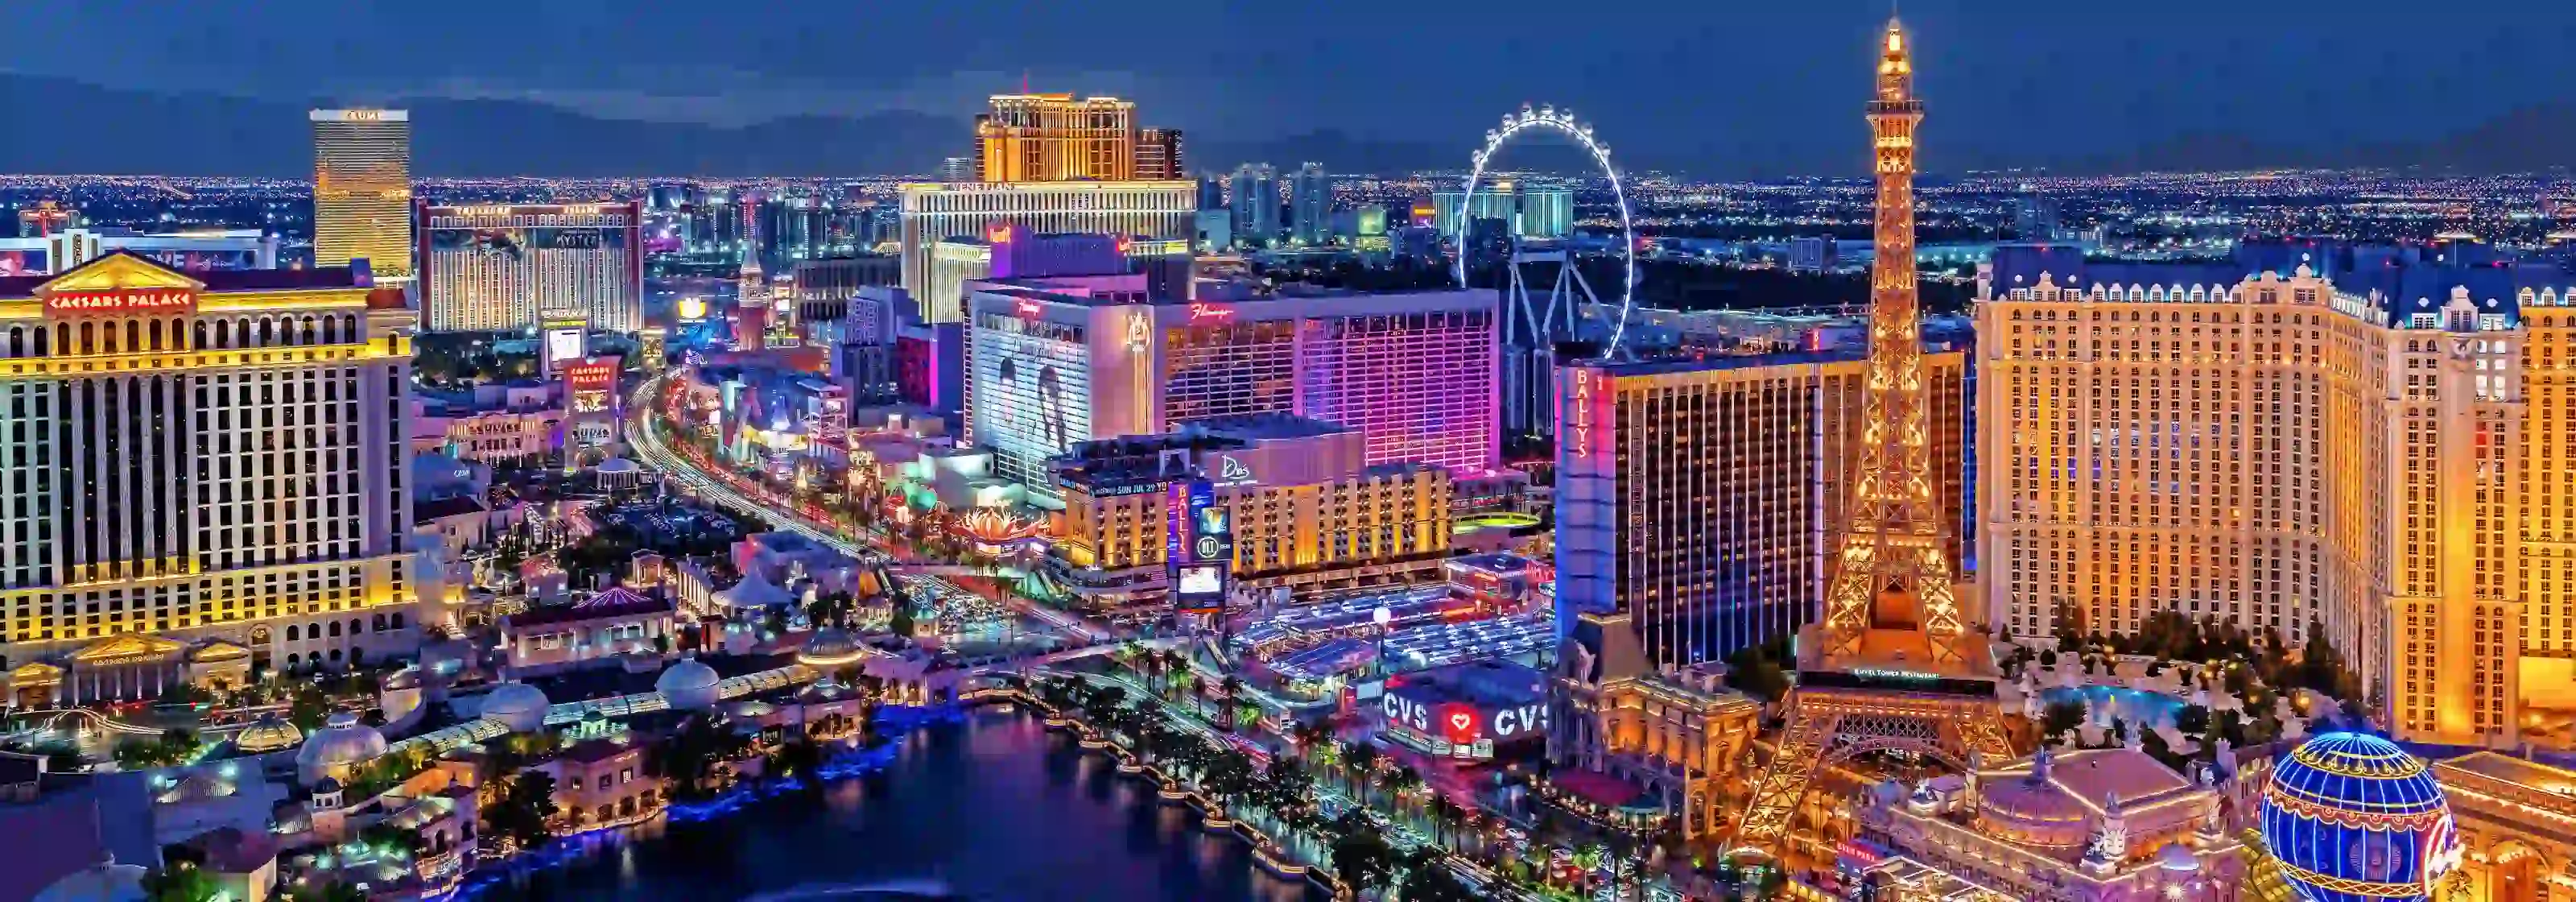 The Ultimate Guide to Exploring Las Vegas: 30 Exciting Things to Do